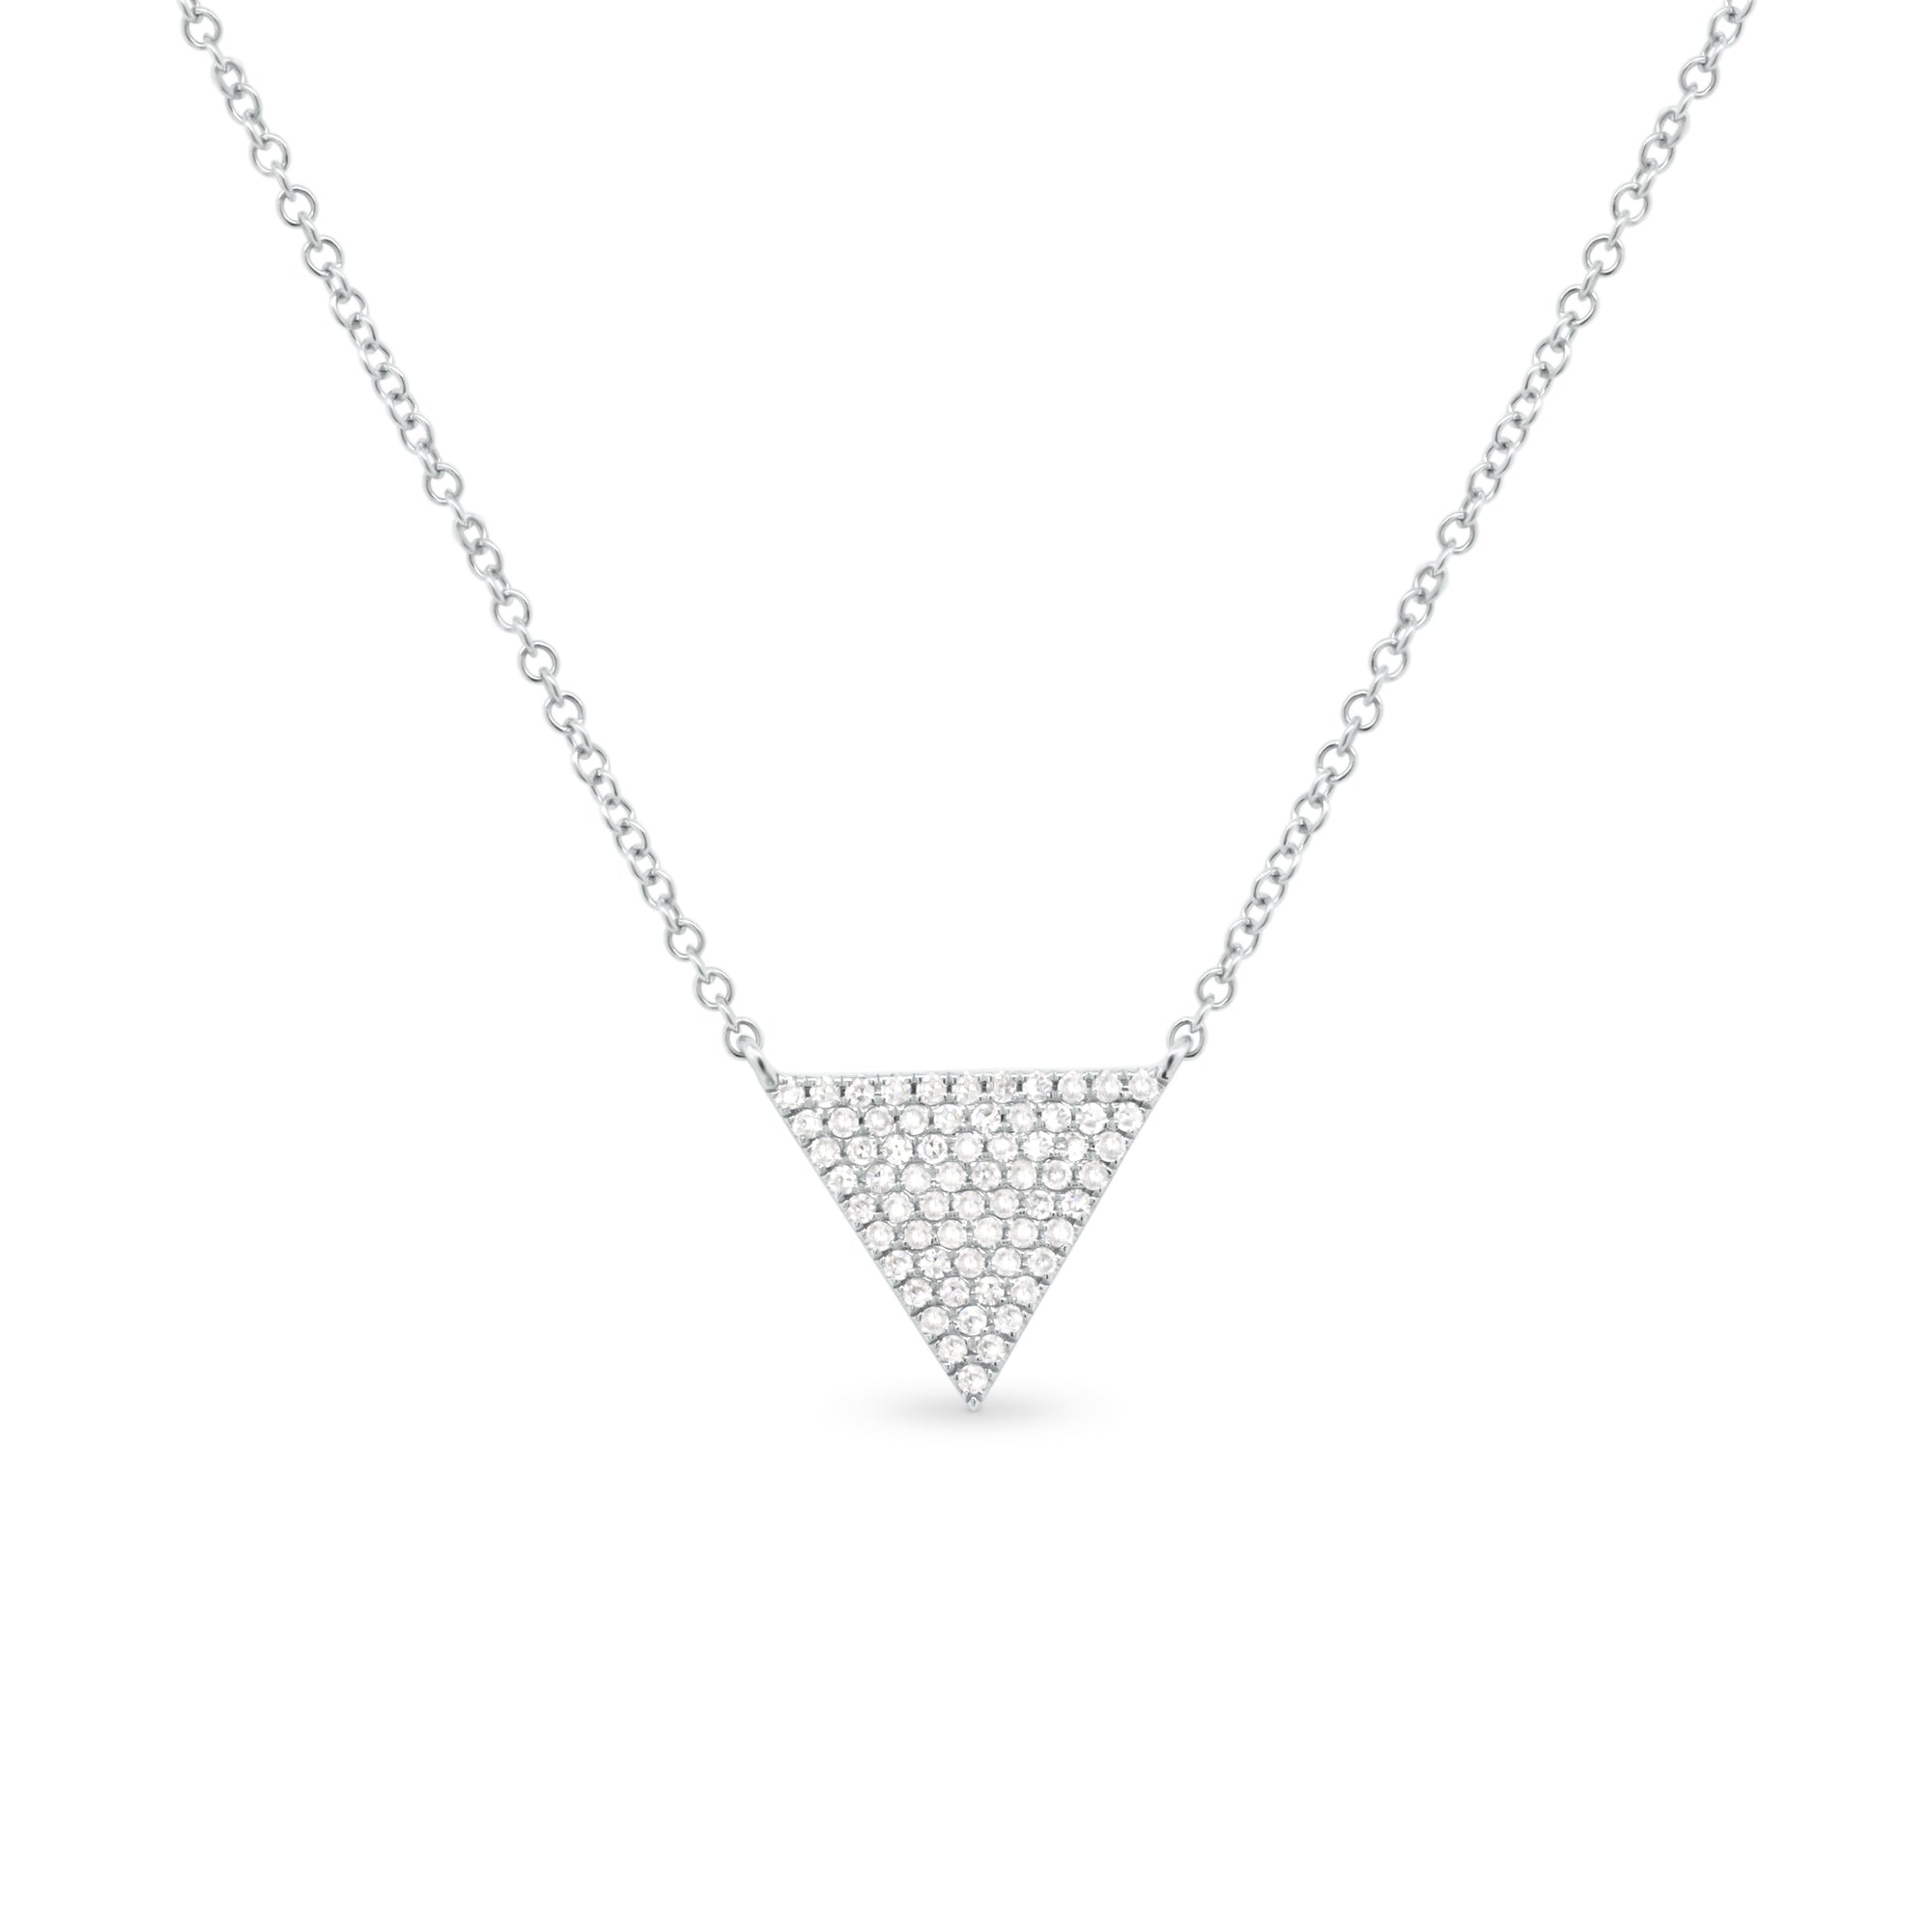 Diamond Triangle Pendant Necklace - 14K gold weighing 1.96 grams  - 66 round diamonds weighing 0.17 carats